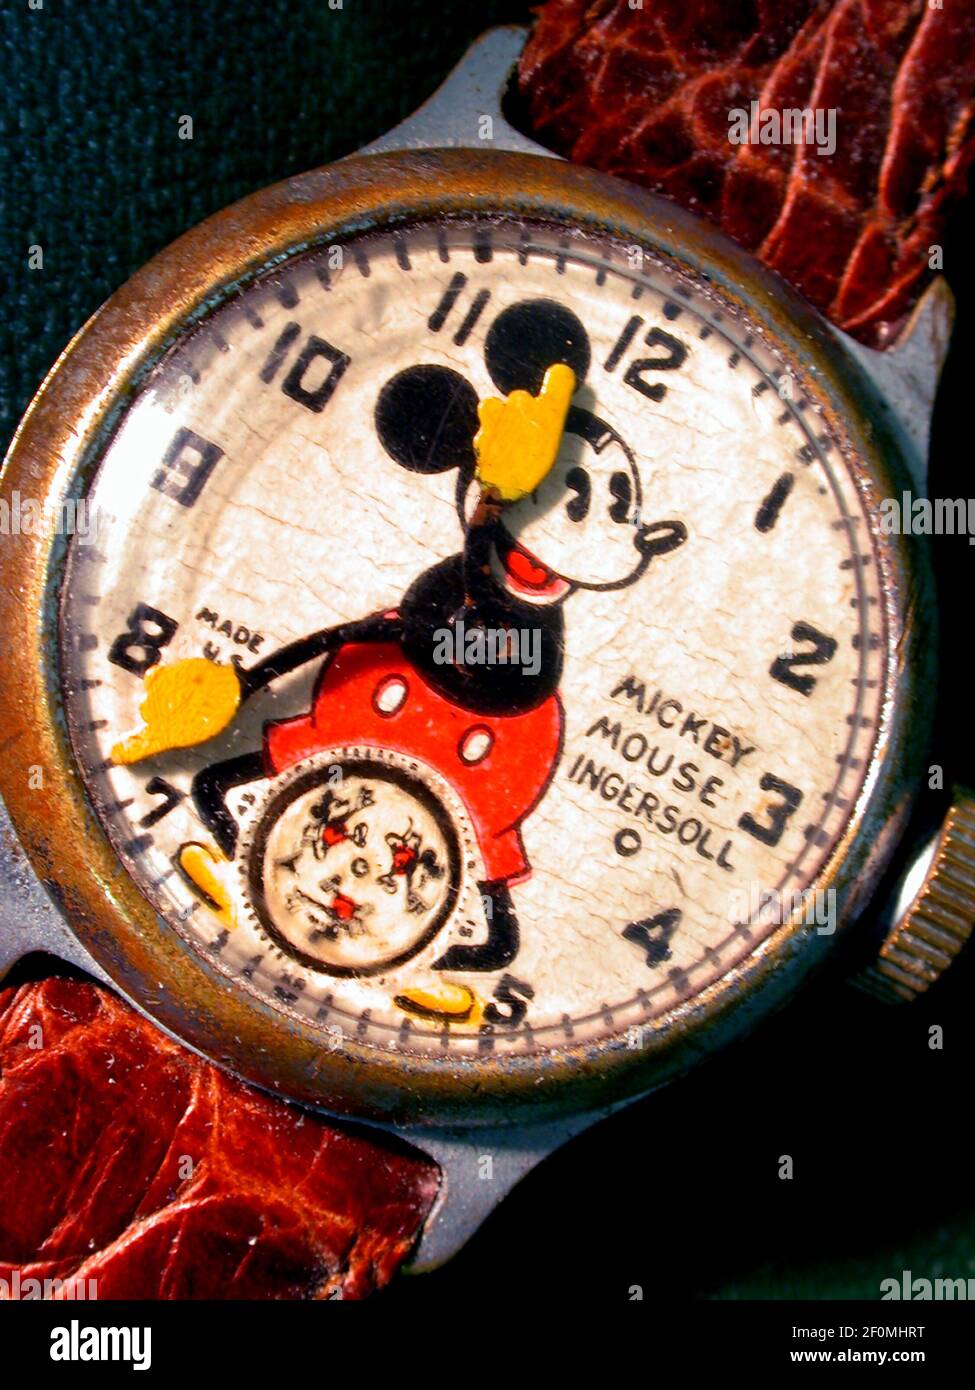 An example of an antique collectible 1933 Ingersoll Mickey Mouse watch in  fair condition. Ingersoll sold over two and one-half million of these  watches in the first two years of production at